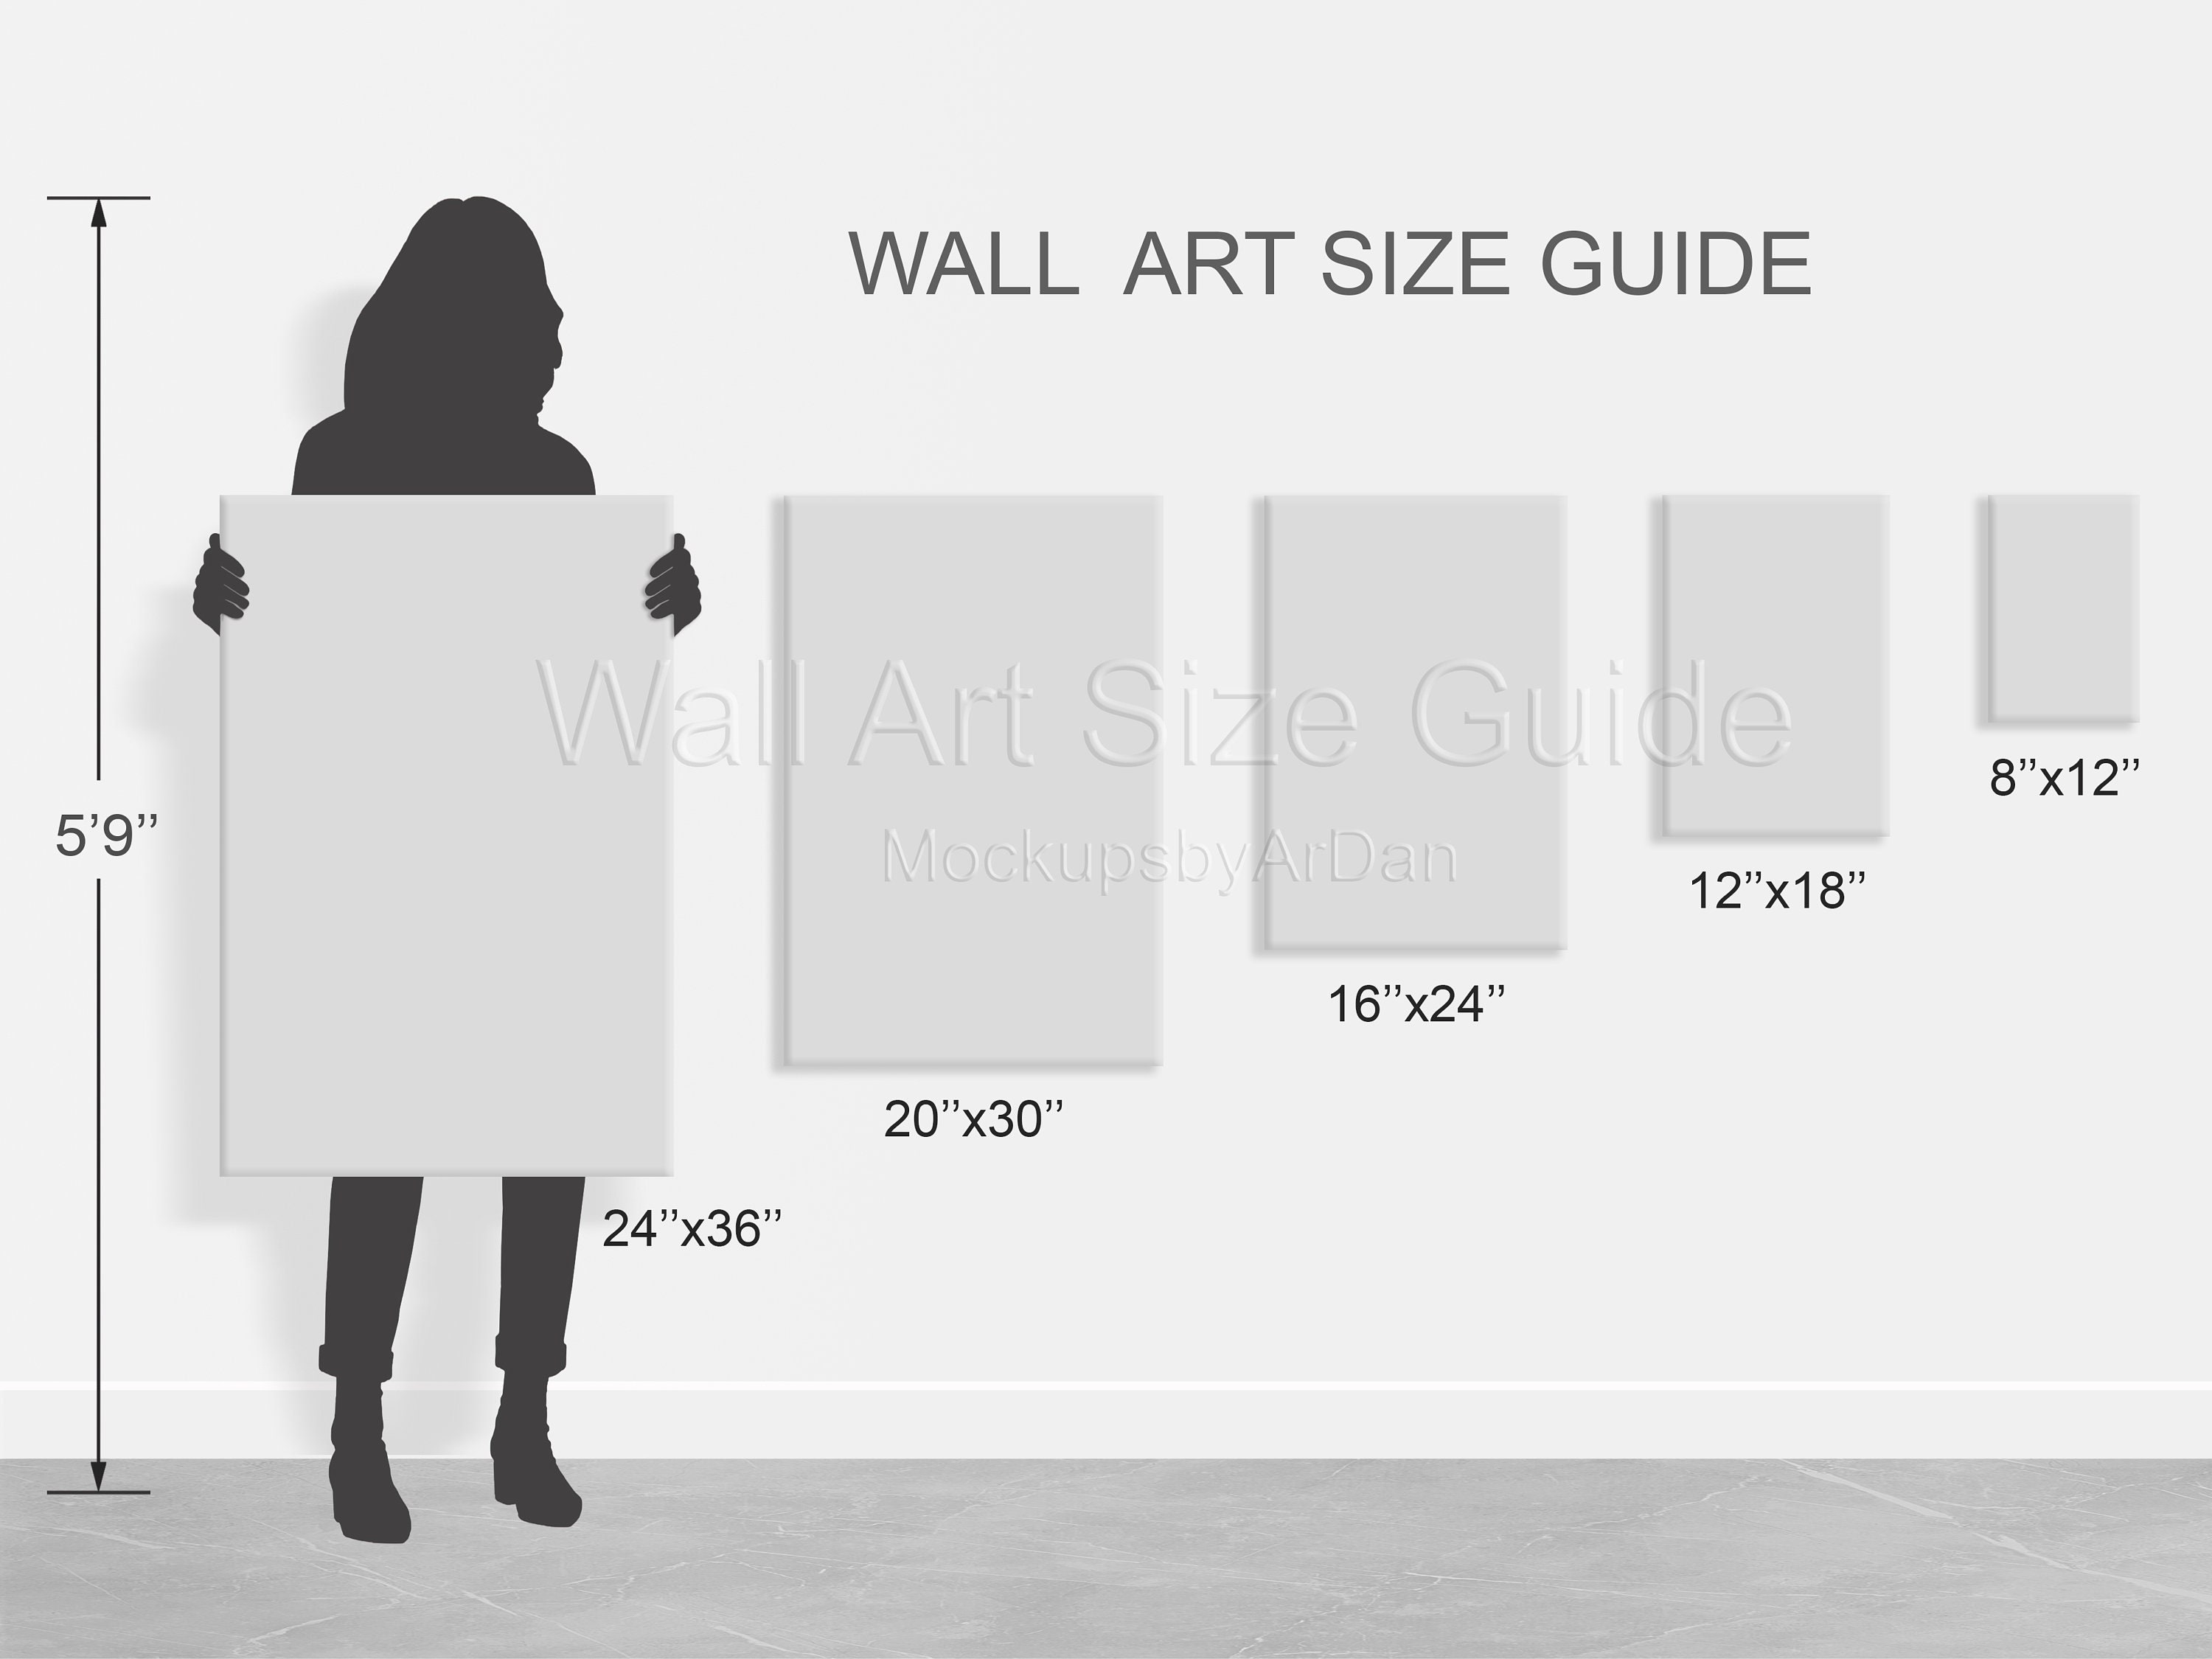 Canvas Sizes: The Ultimate Guide to Choosing the Perfect Portrait